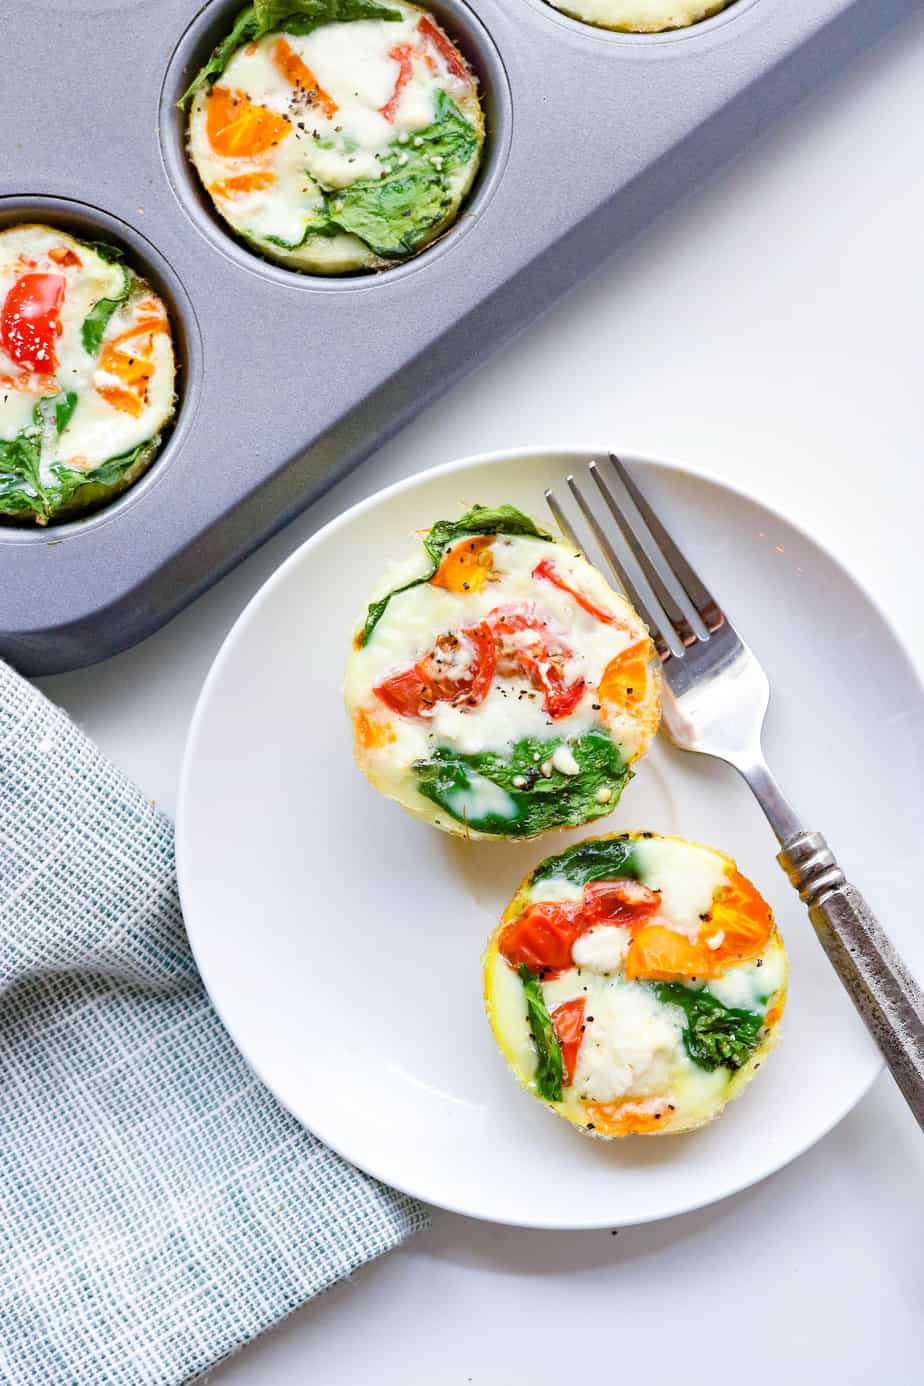 two egg muffins with veggies in them on a round white plate with a silver fork on the plate and a muffin pan with more egg muffins in it behind it